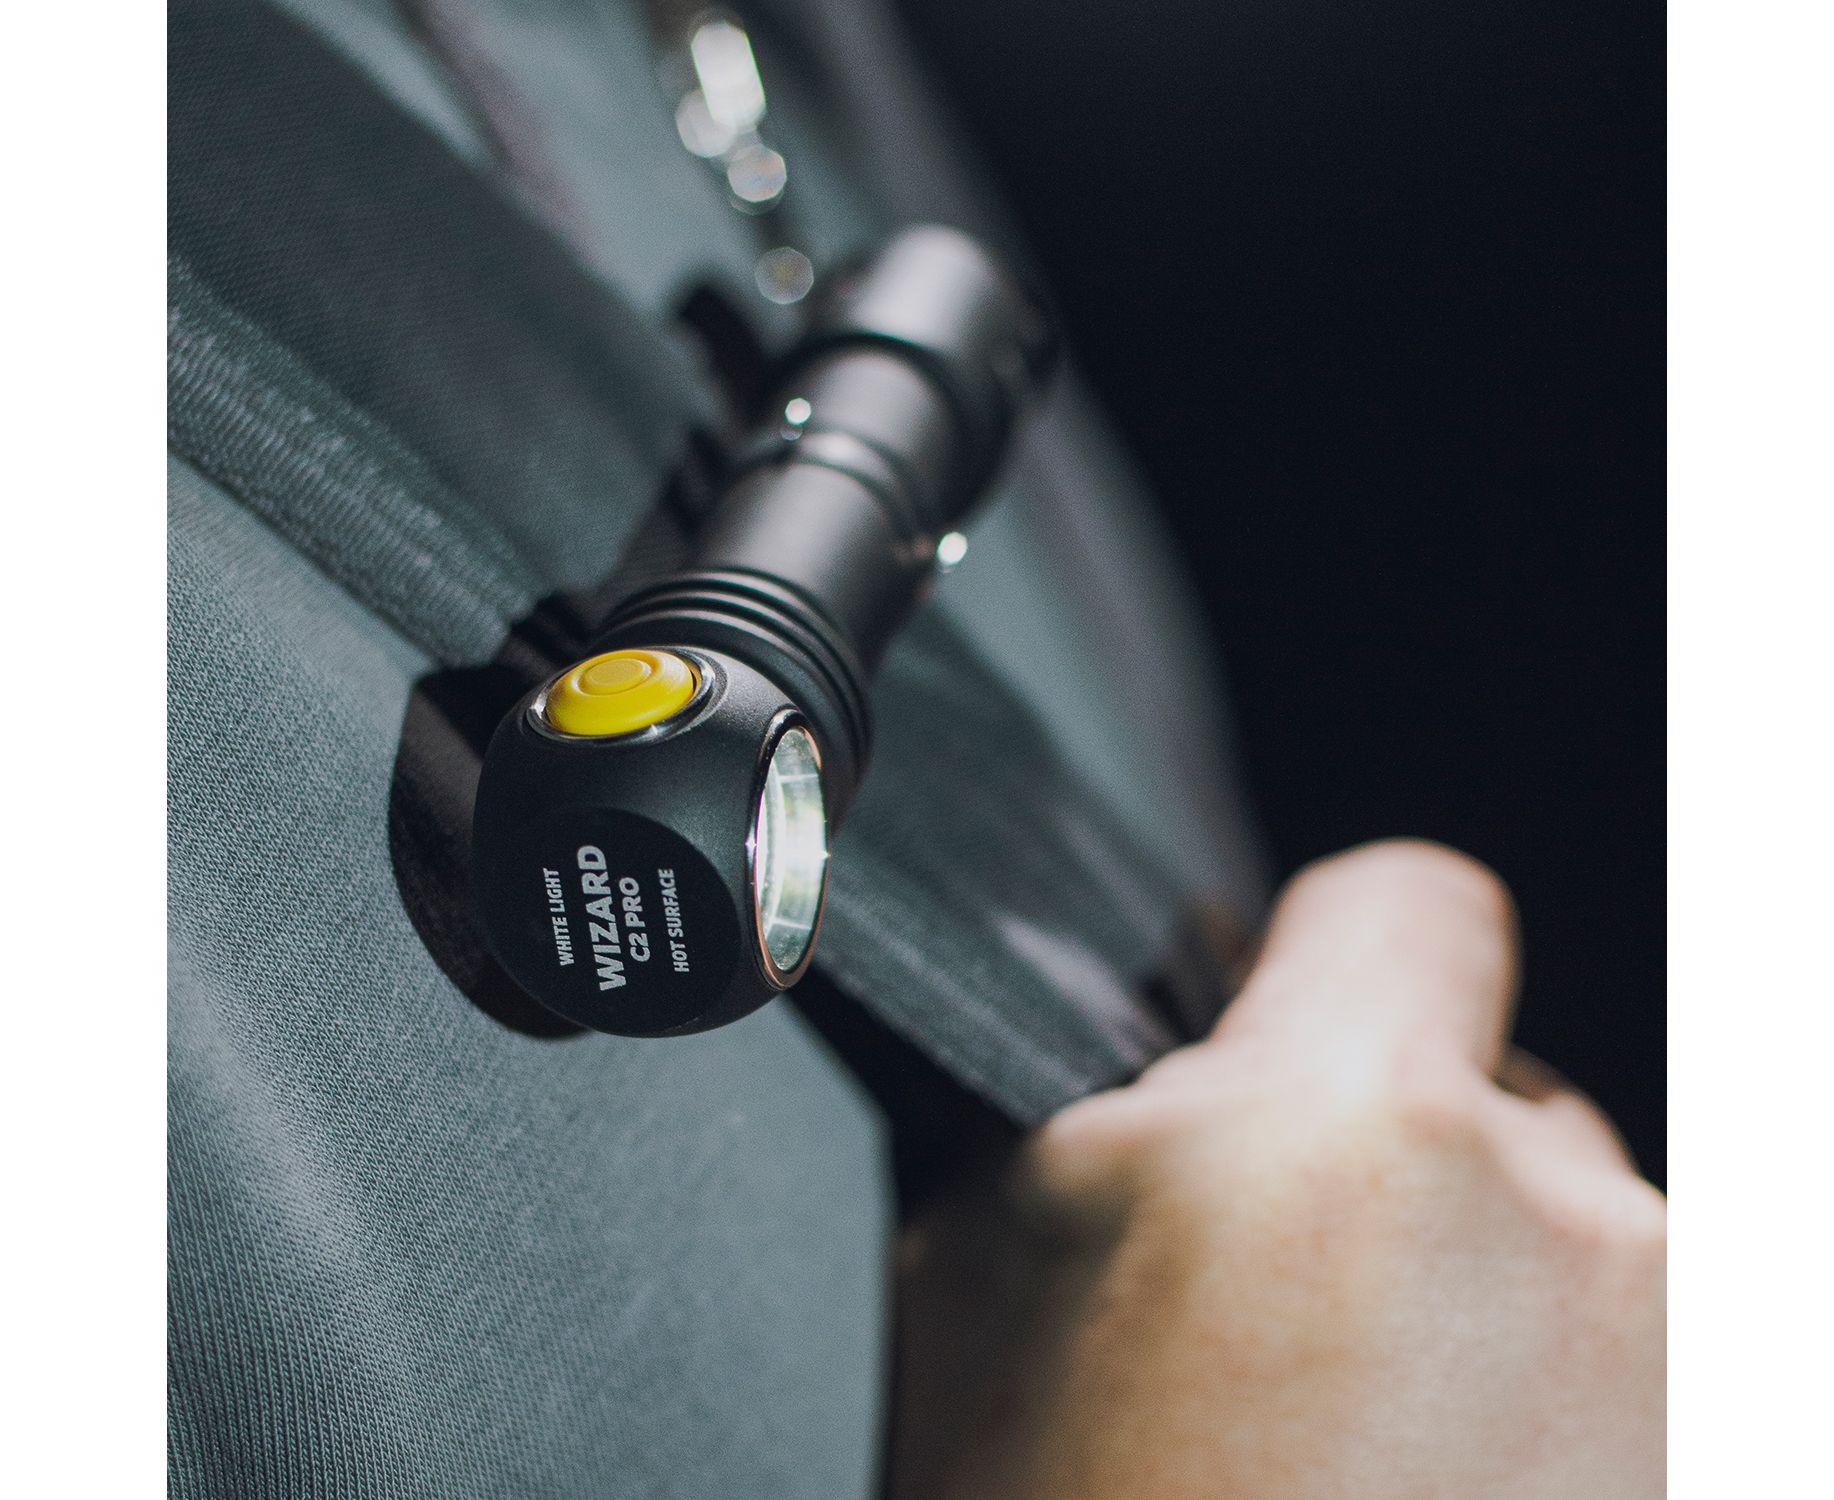 Armytek Wizard C2 Pro Nichia LED Multi Flashlight -1600 Lumens Magnetic  USB Charger and Battery Included